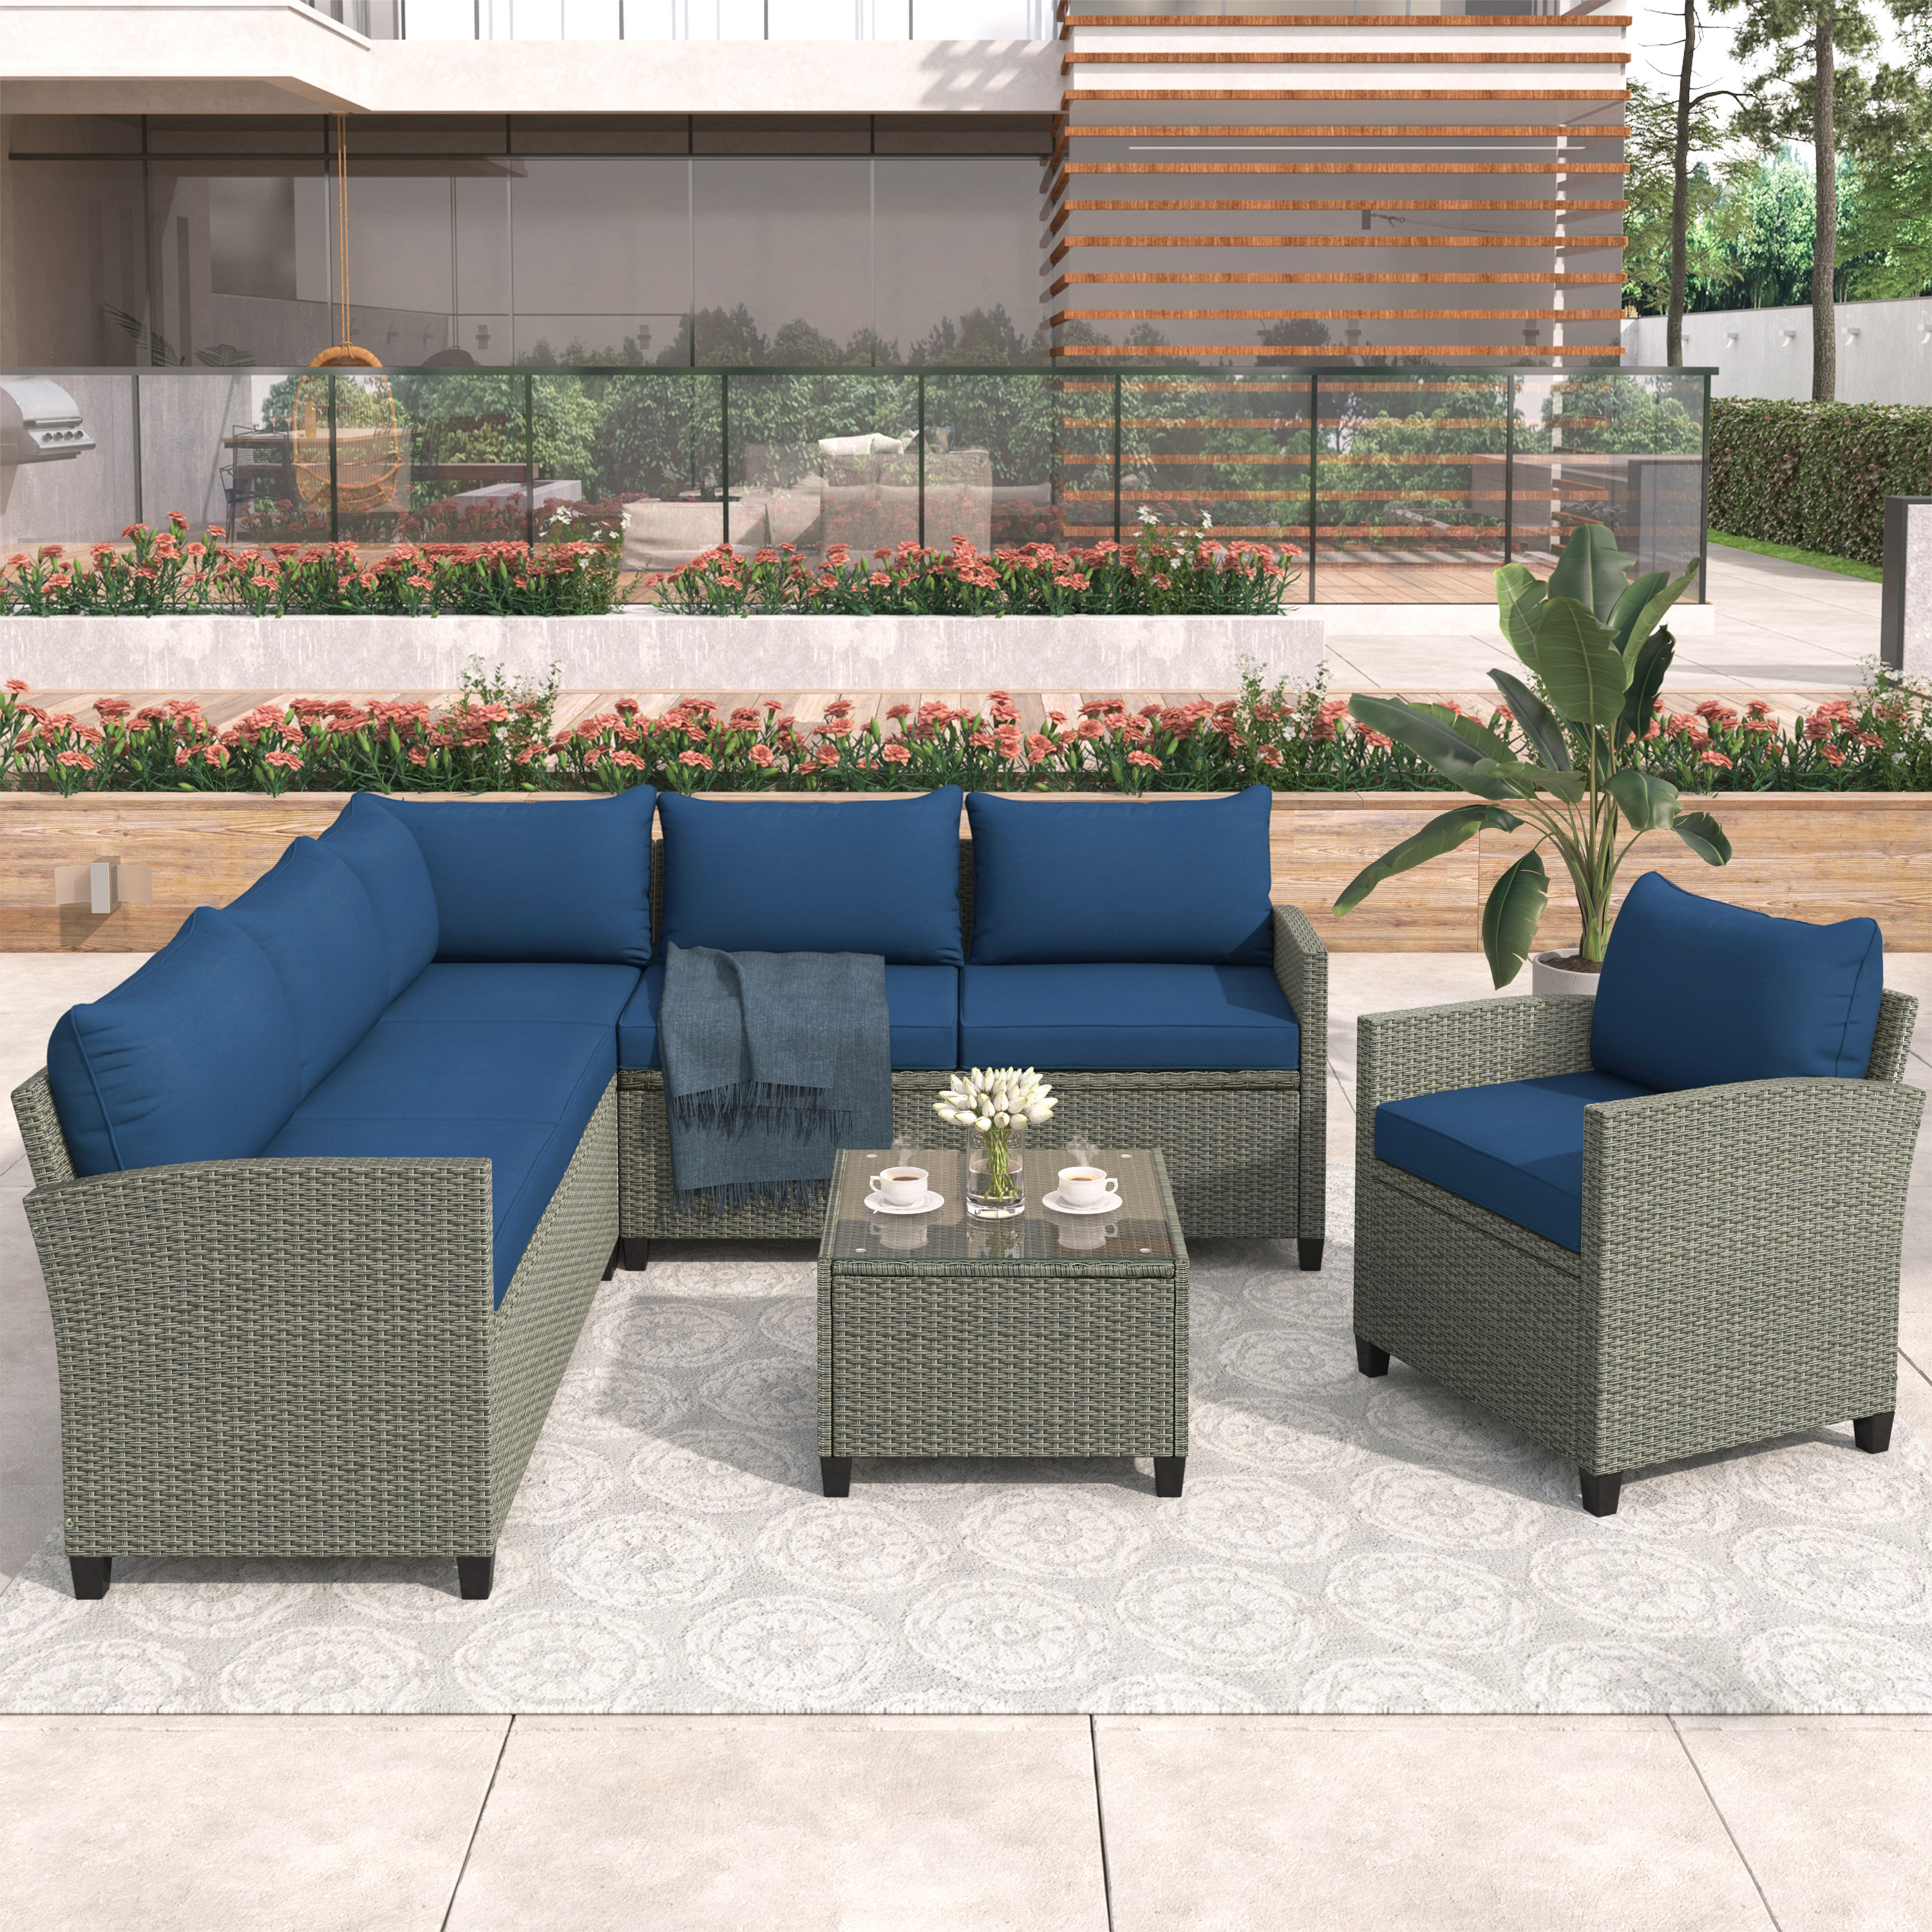 BTMWAY 5 Pieces Outdoor Wicker Sectional Sofa Set, 3.1" Cushioned Outdoor Furniture Set, Rattan Patio Conversation Set with Side Table, Up to 350lbs Capacity, for Backyard Garden Patio,Blue, N3011 - image 1 of 11